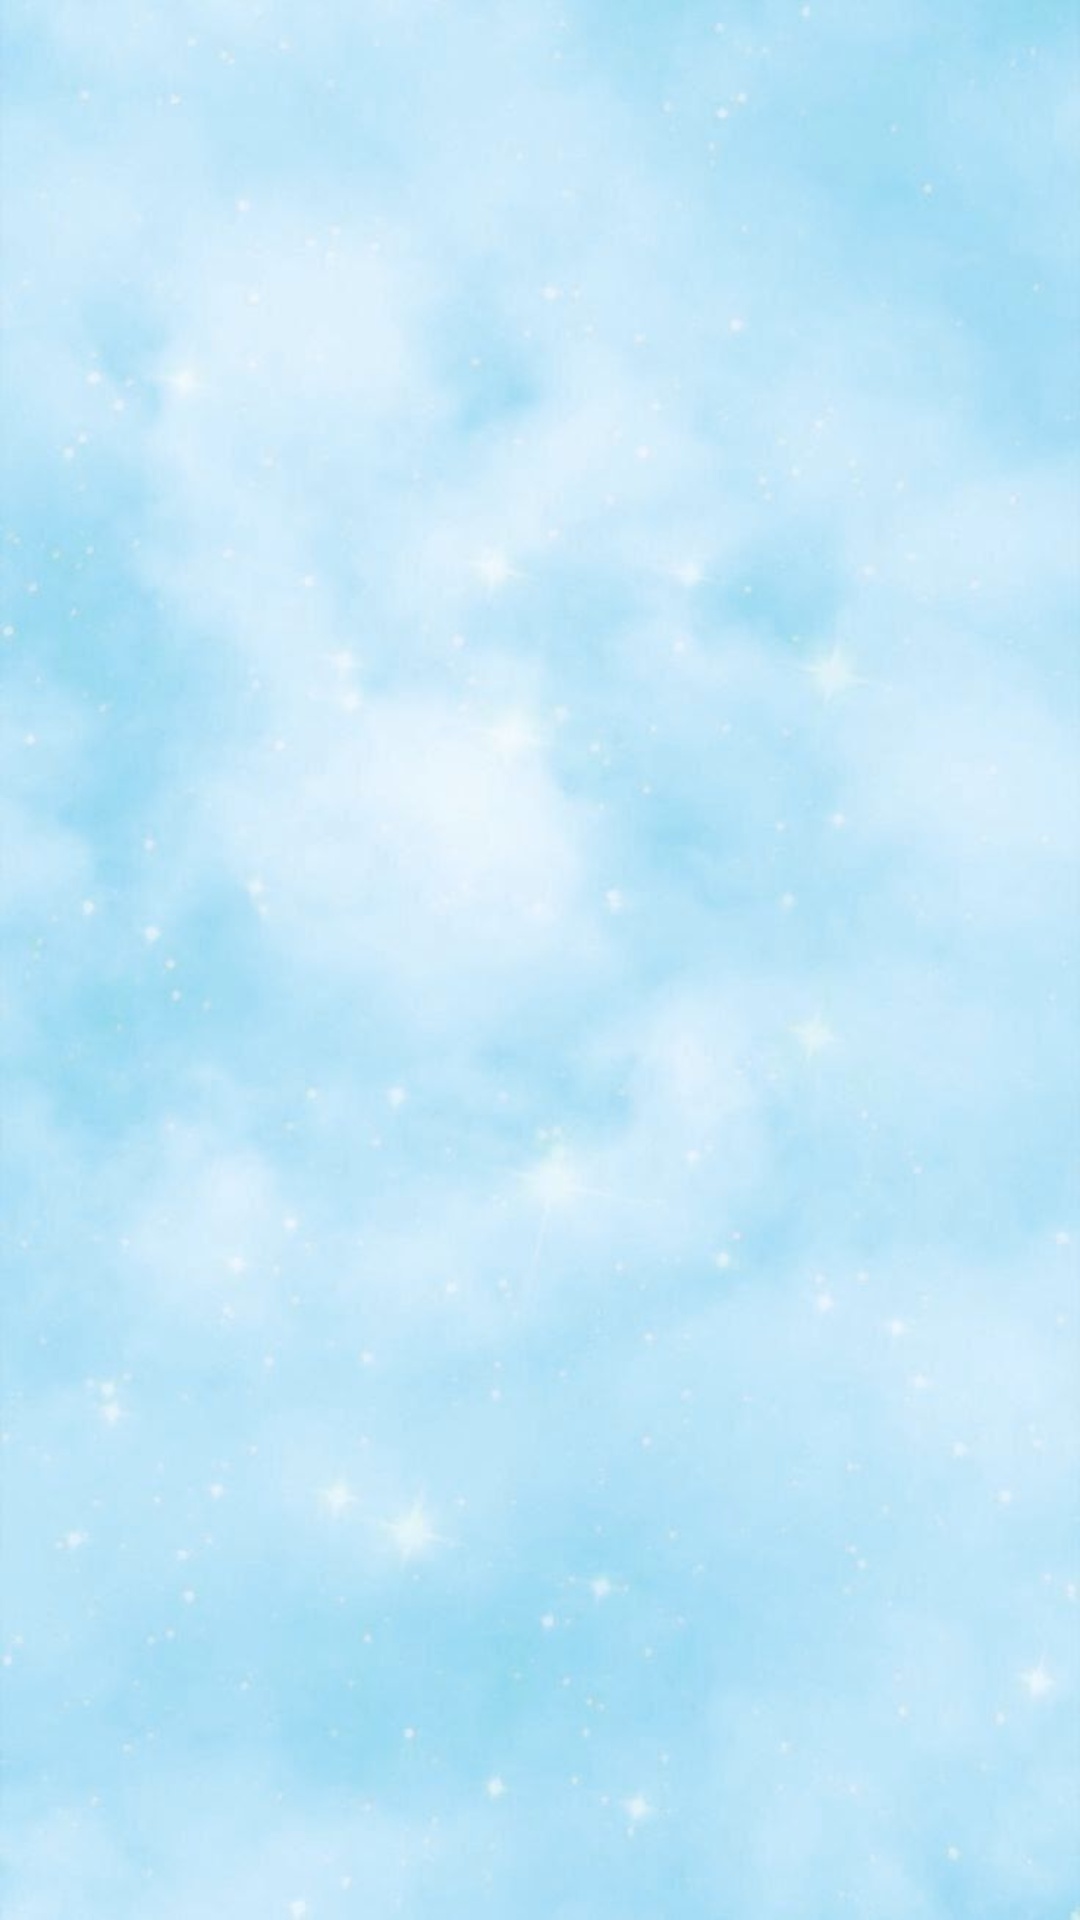 A blue background with white stars - Pastel blue